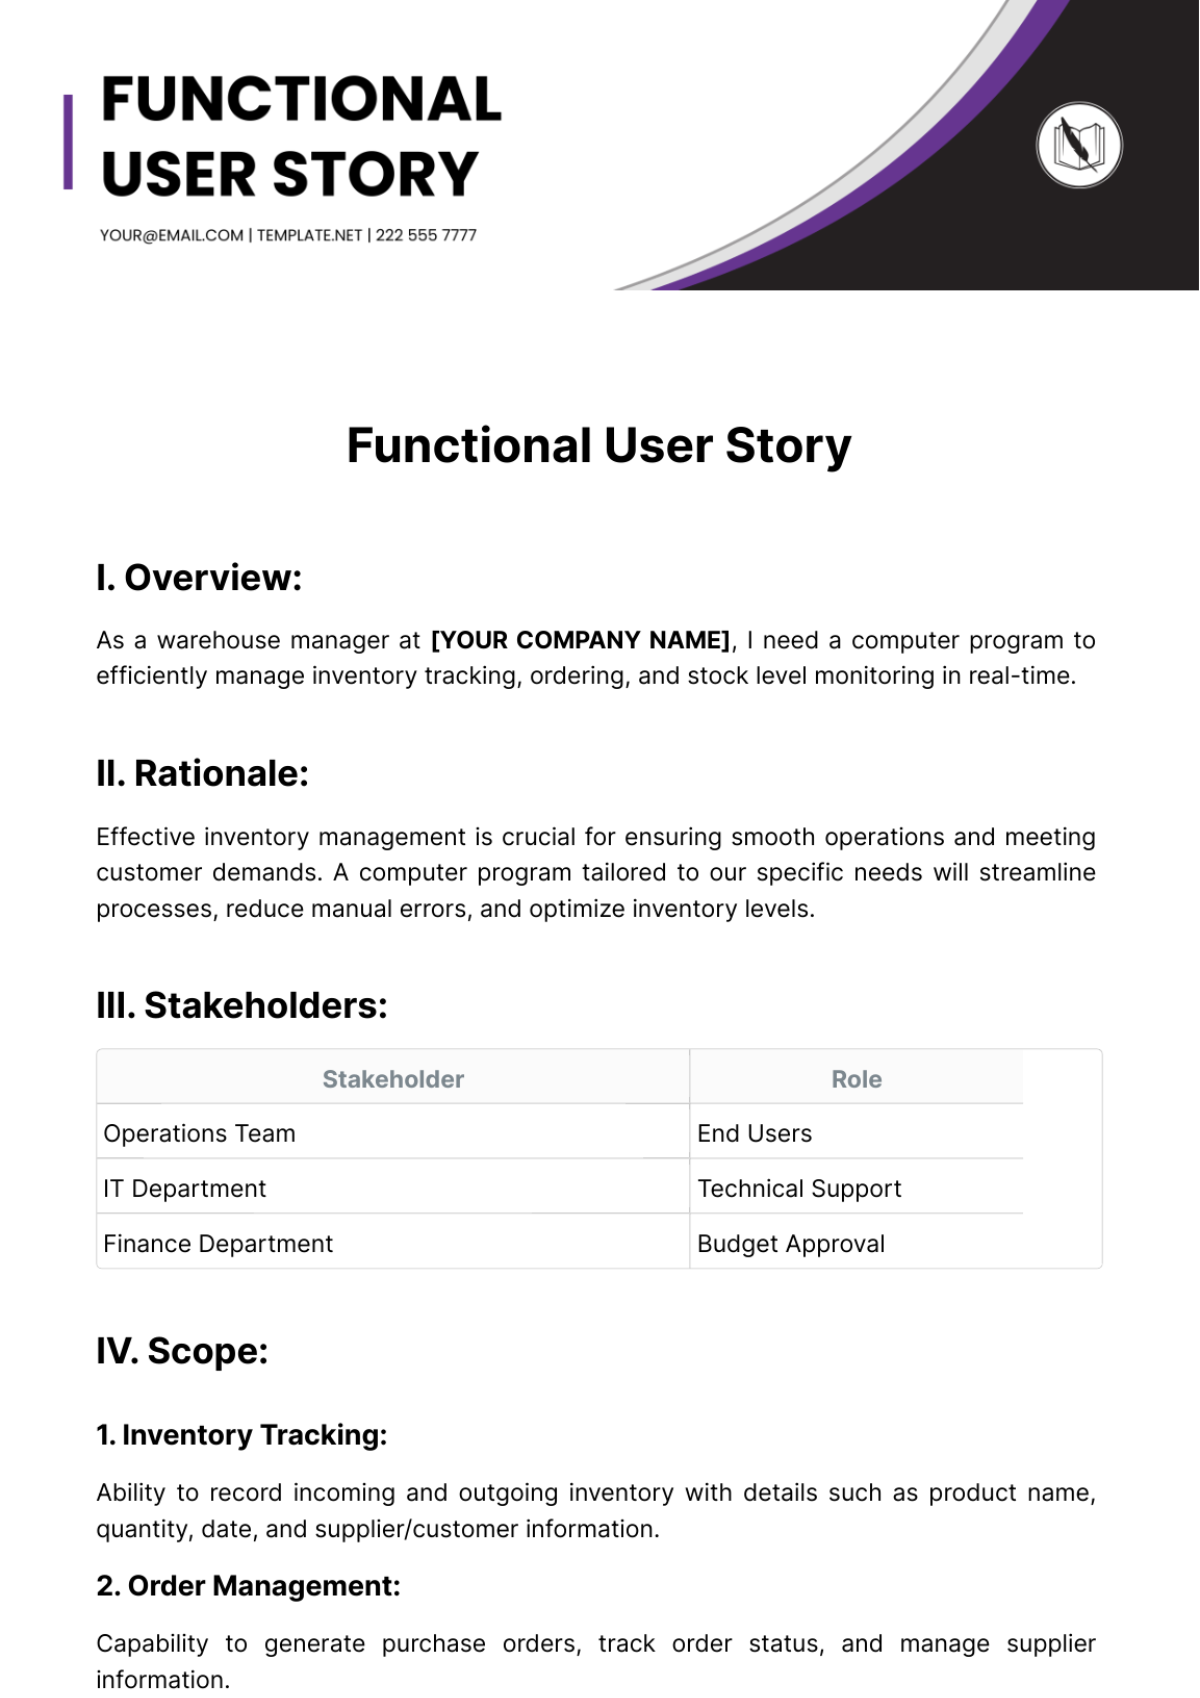 Free Functional User Story Template